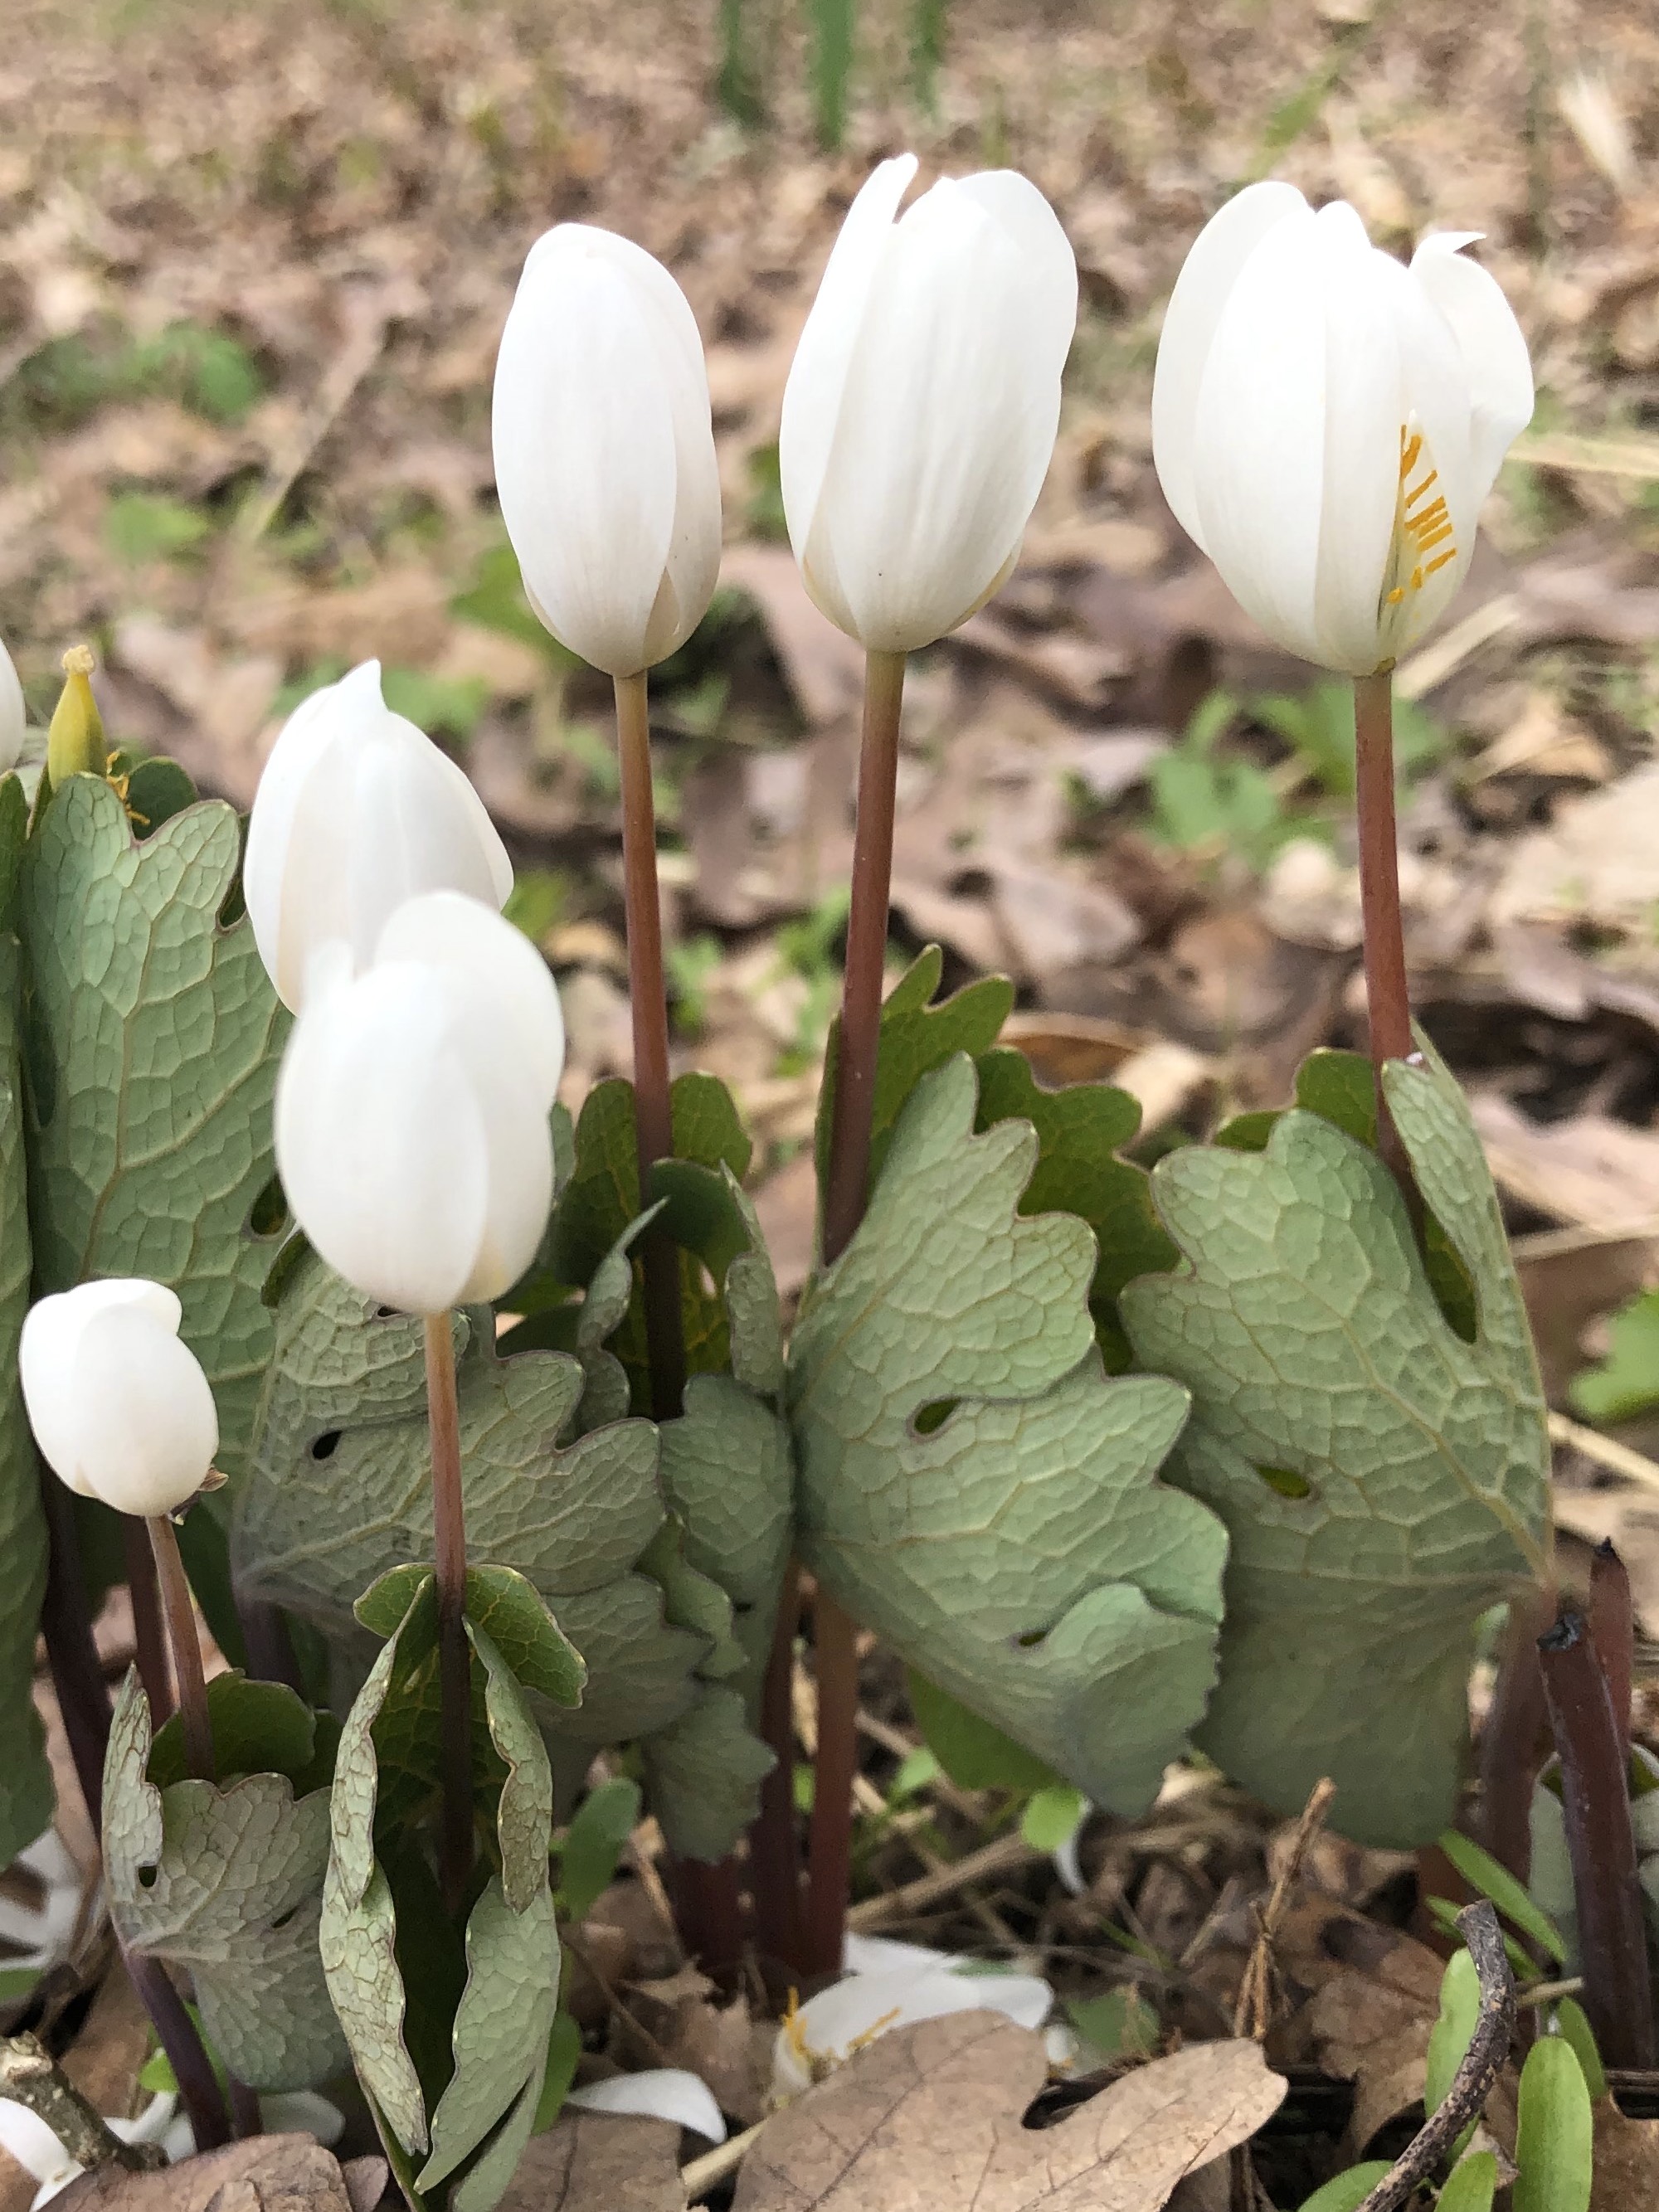 Bloodroot in Nakoma Park woods in Madison, Wisconsin on April 21, 2021.